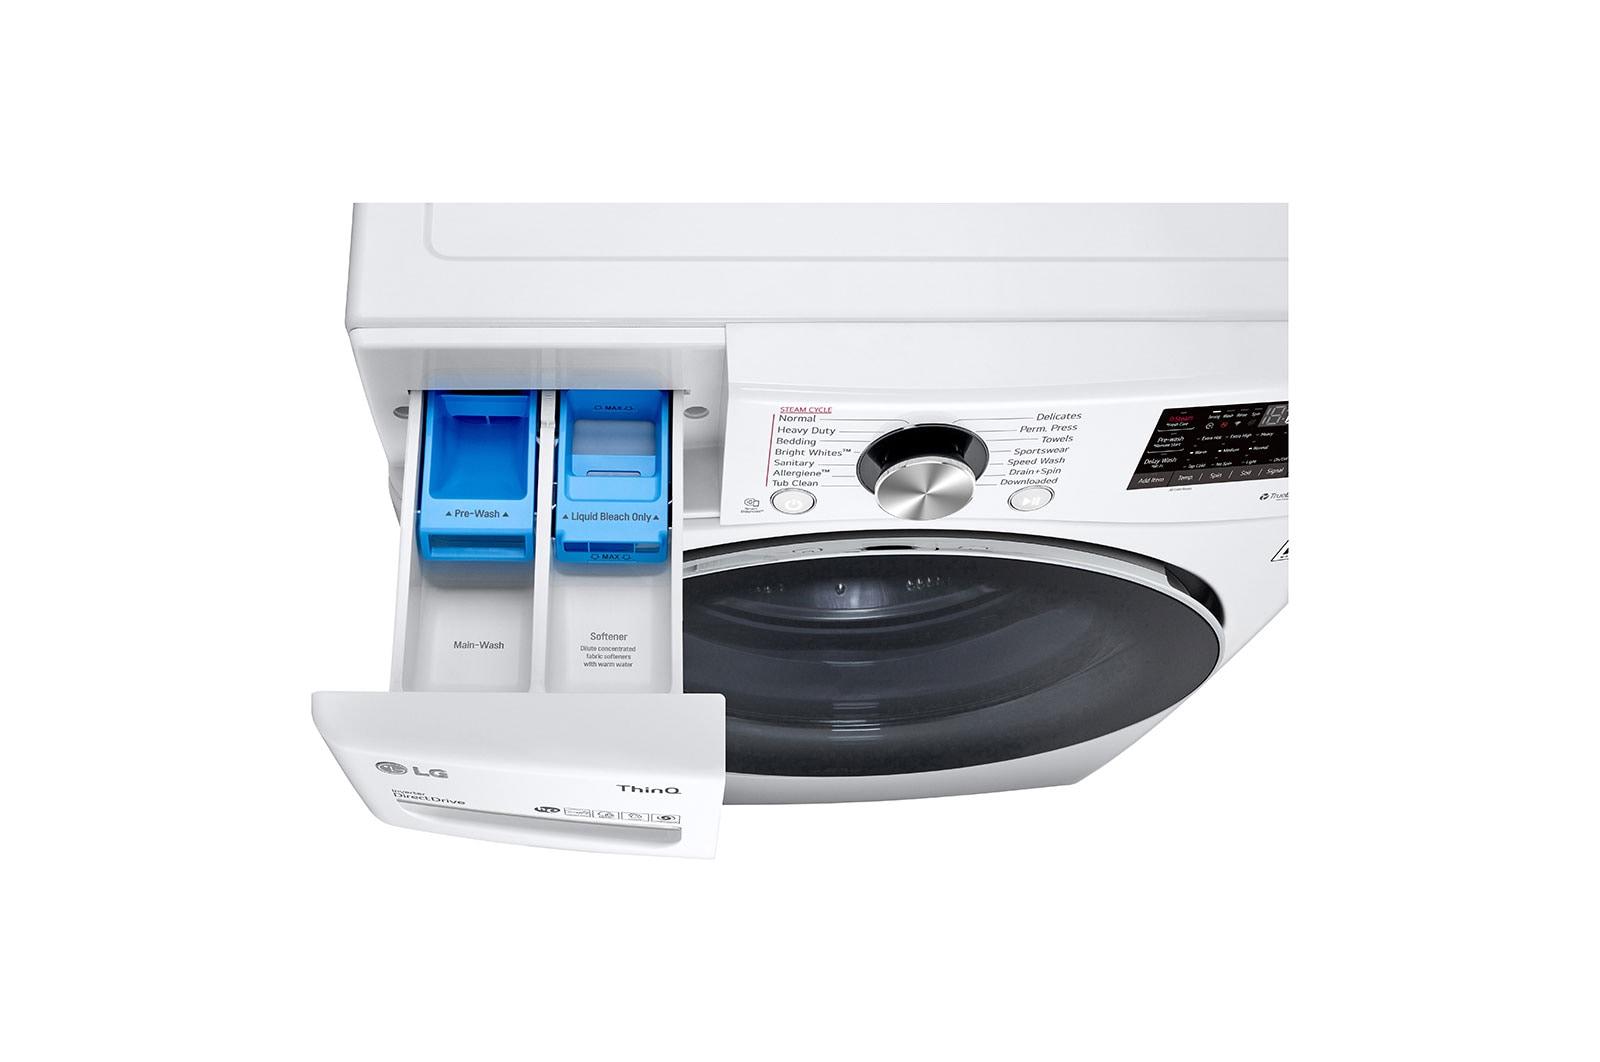 5.0 cu. ft. Mega Capacity Smart wi-fi Enabled Front Load Washer with TurboWash™ 360(degree) and Built-In Intelligence